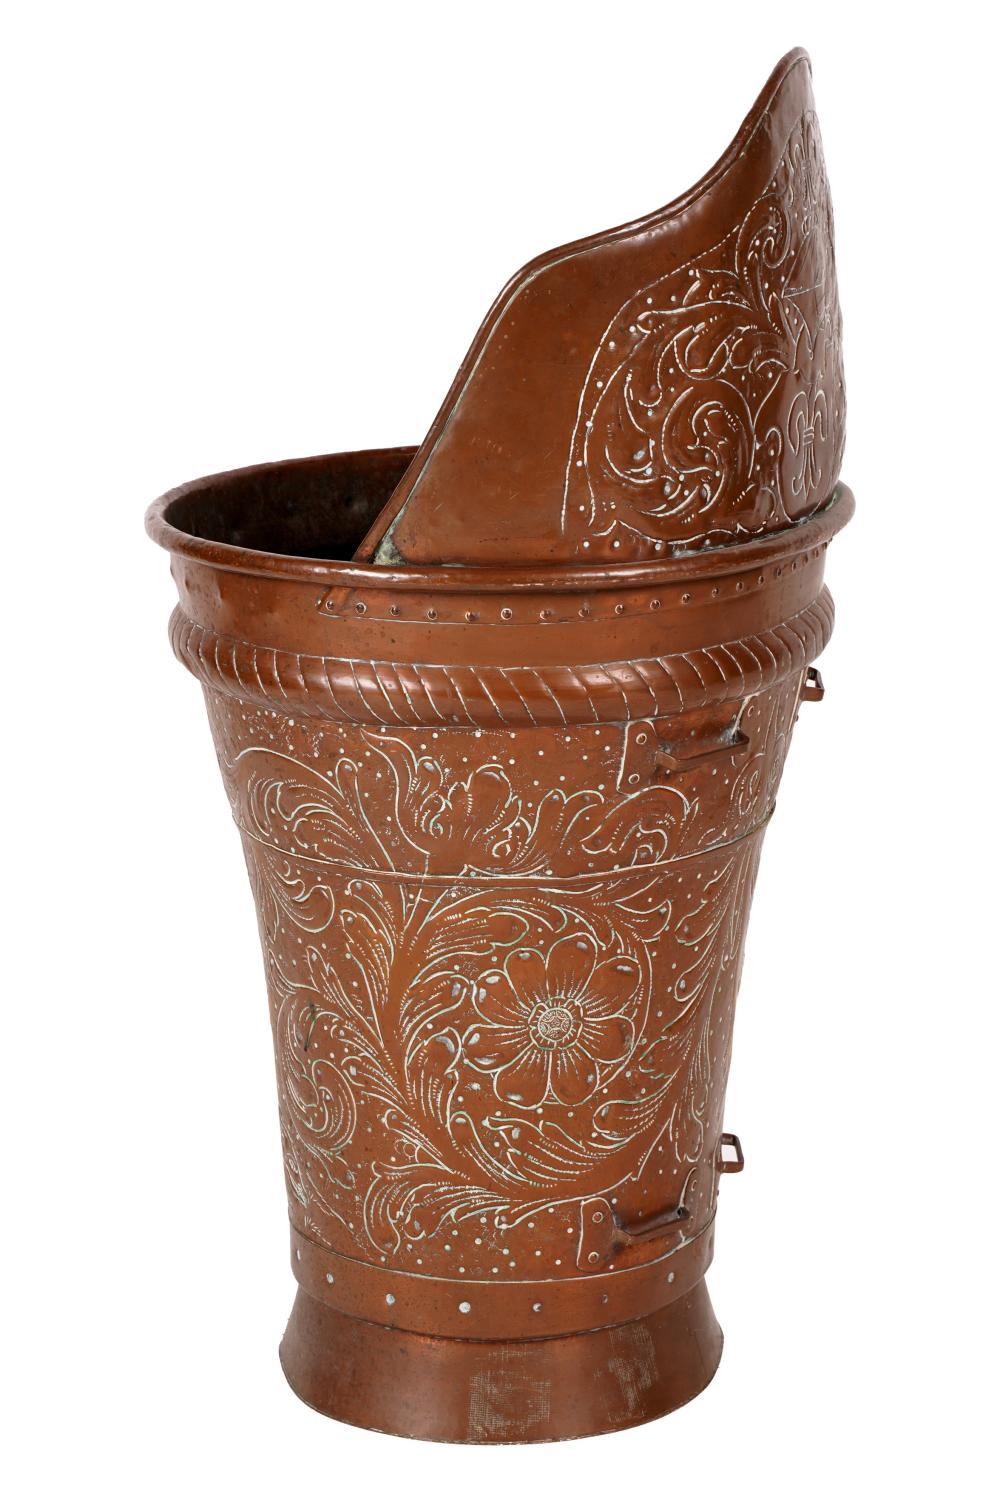 CONTINENTAL INCISED COPPER BINwith 301776